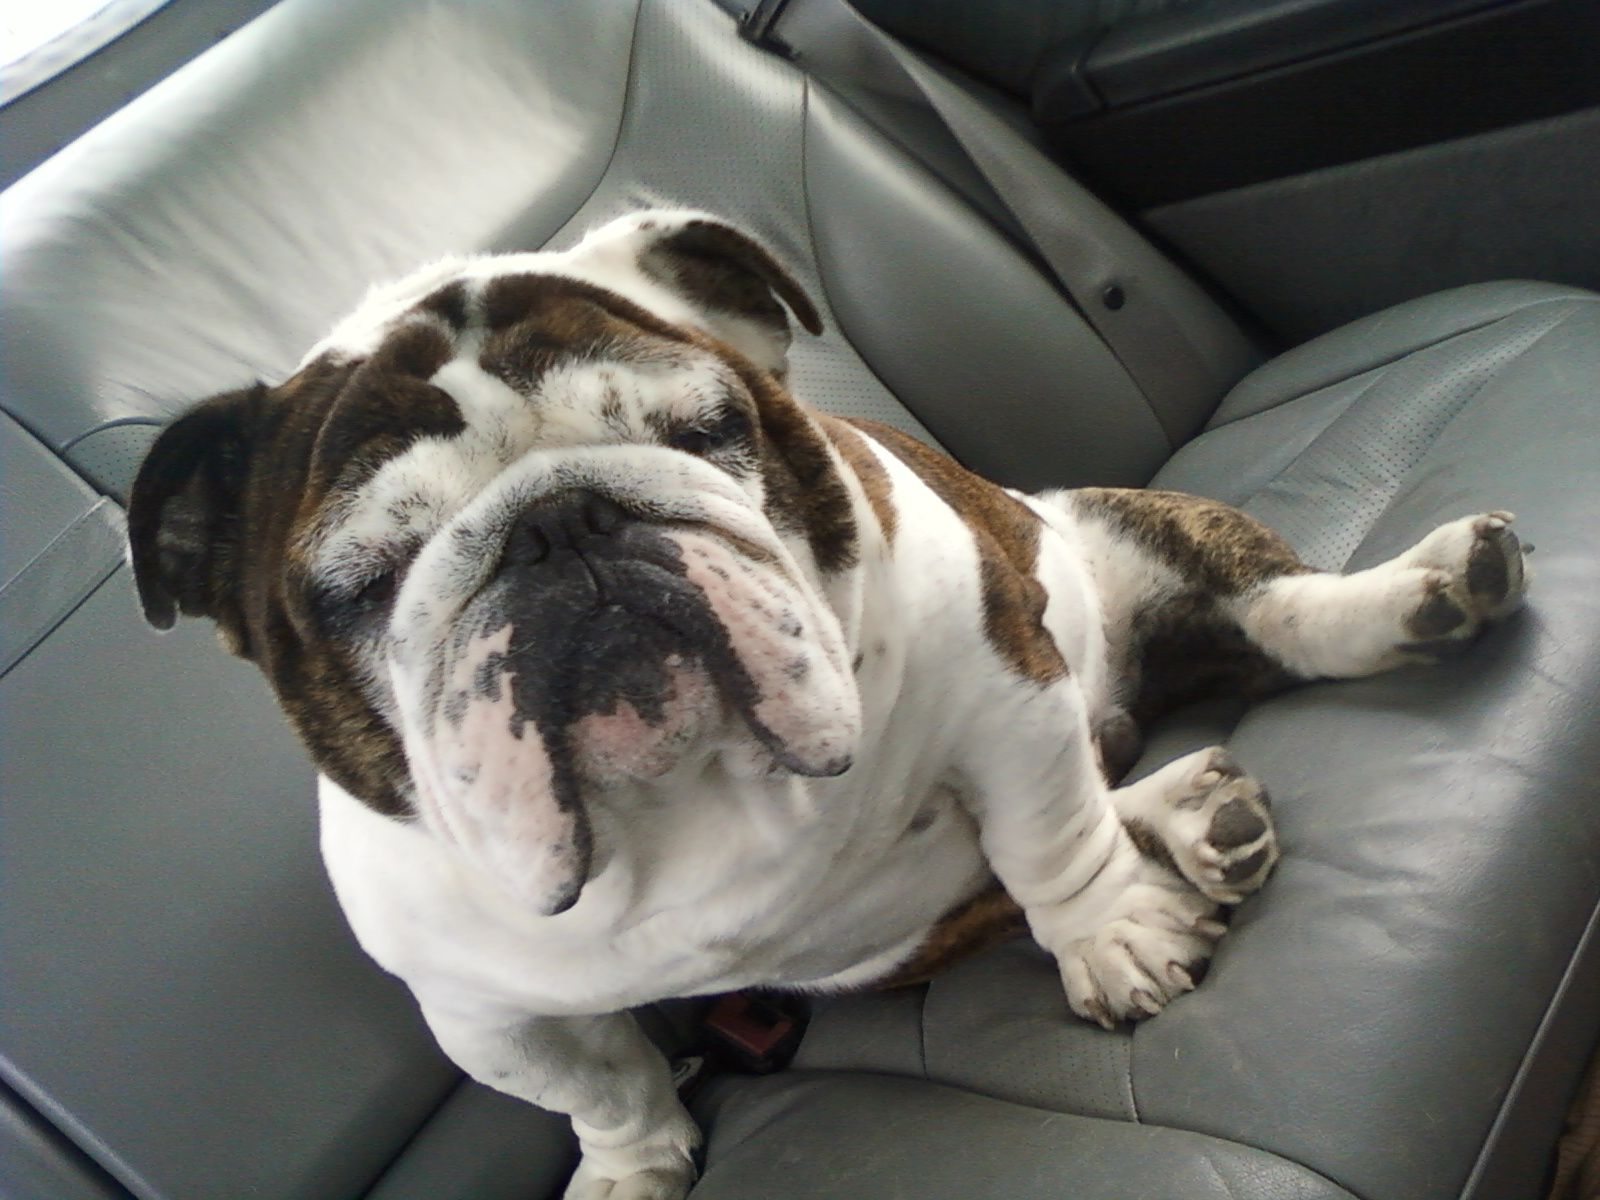 A Kelso man was sentenced Thursday to more than three years in prison for his role in kidnapping the bulldog Jagger in Woodland and holding it for ransom.